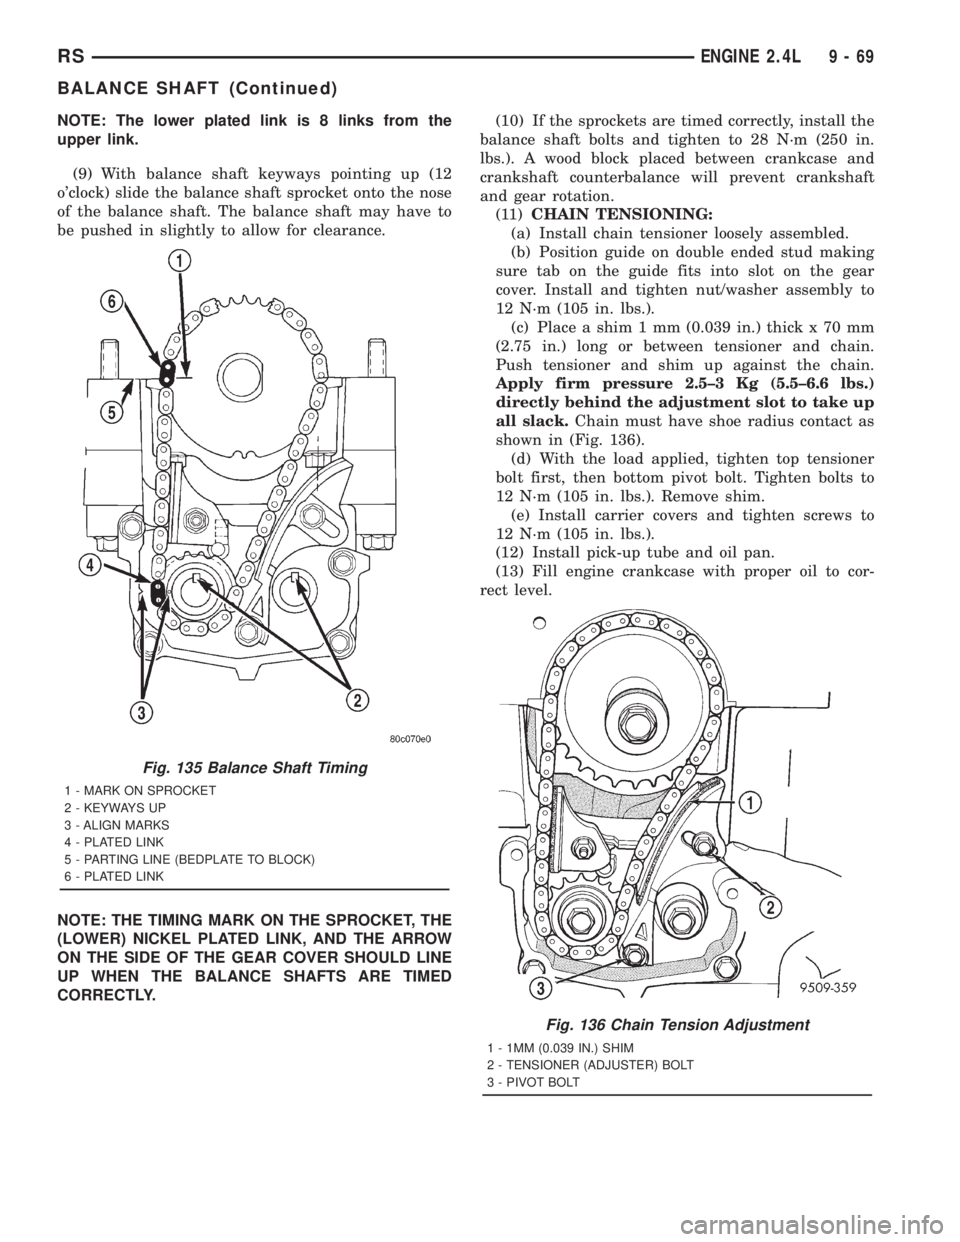 CHRYSLER VOYAGER 2001  Service Manual NOTE: The lower plated link is 8 links from the
upper link.
(9) With balance shaft keyways pointing up (12
oclock) slide the balance shaft sprocket onto the nose
of the balance shaft. The balance sha